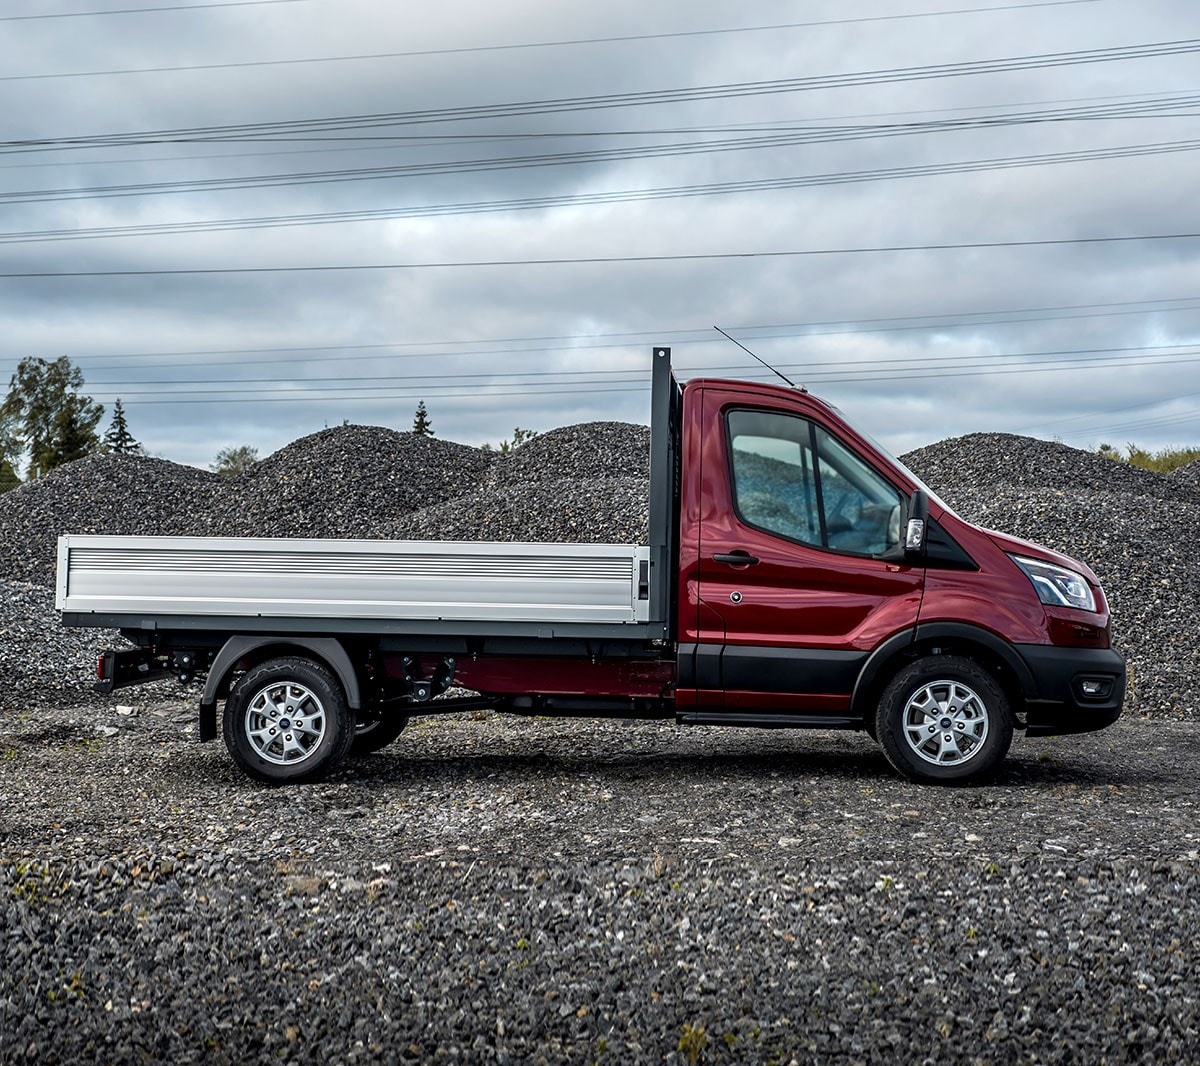 New Transit Chassis Cab front view